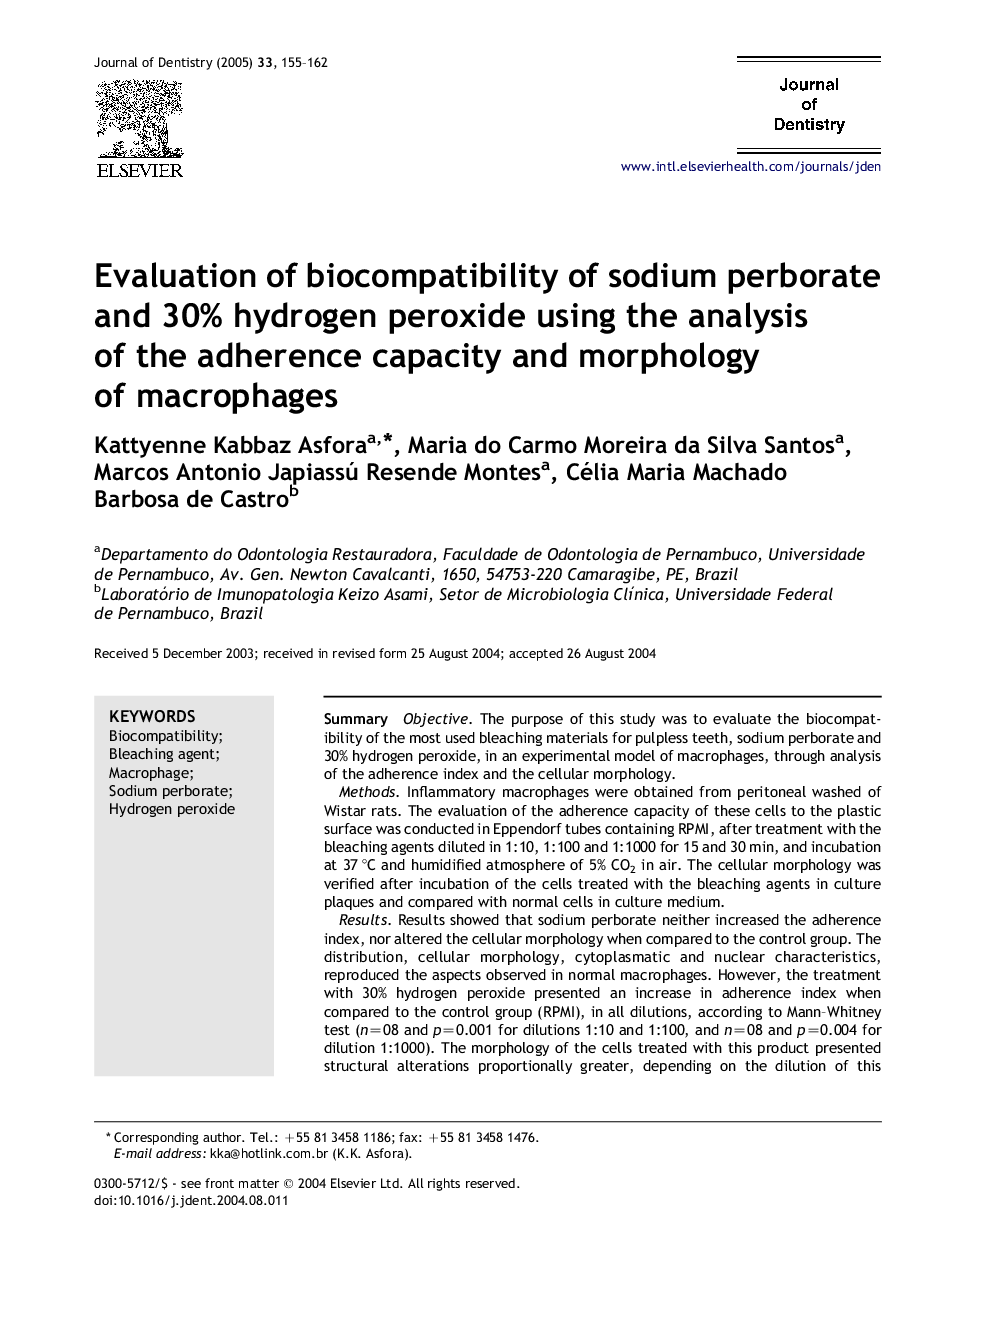 Evaluation of biocompatibility of sodium perborate and 30% hydrogen peroxide using the analysis of the adherence capacity and morphology of macrophages